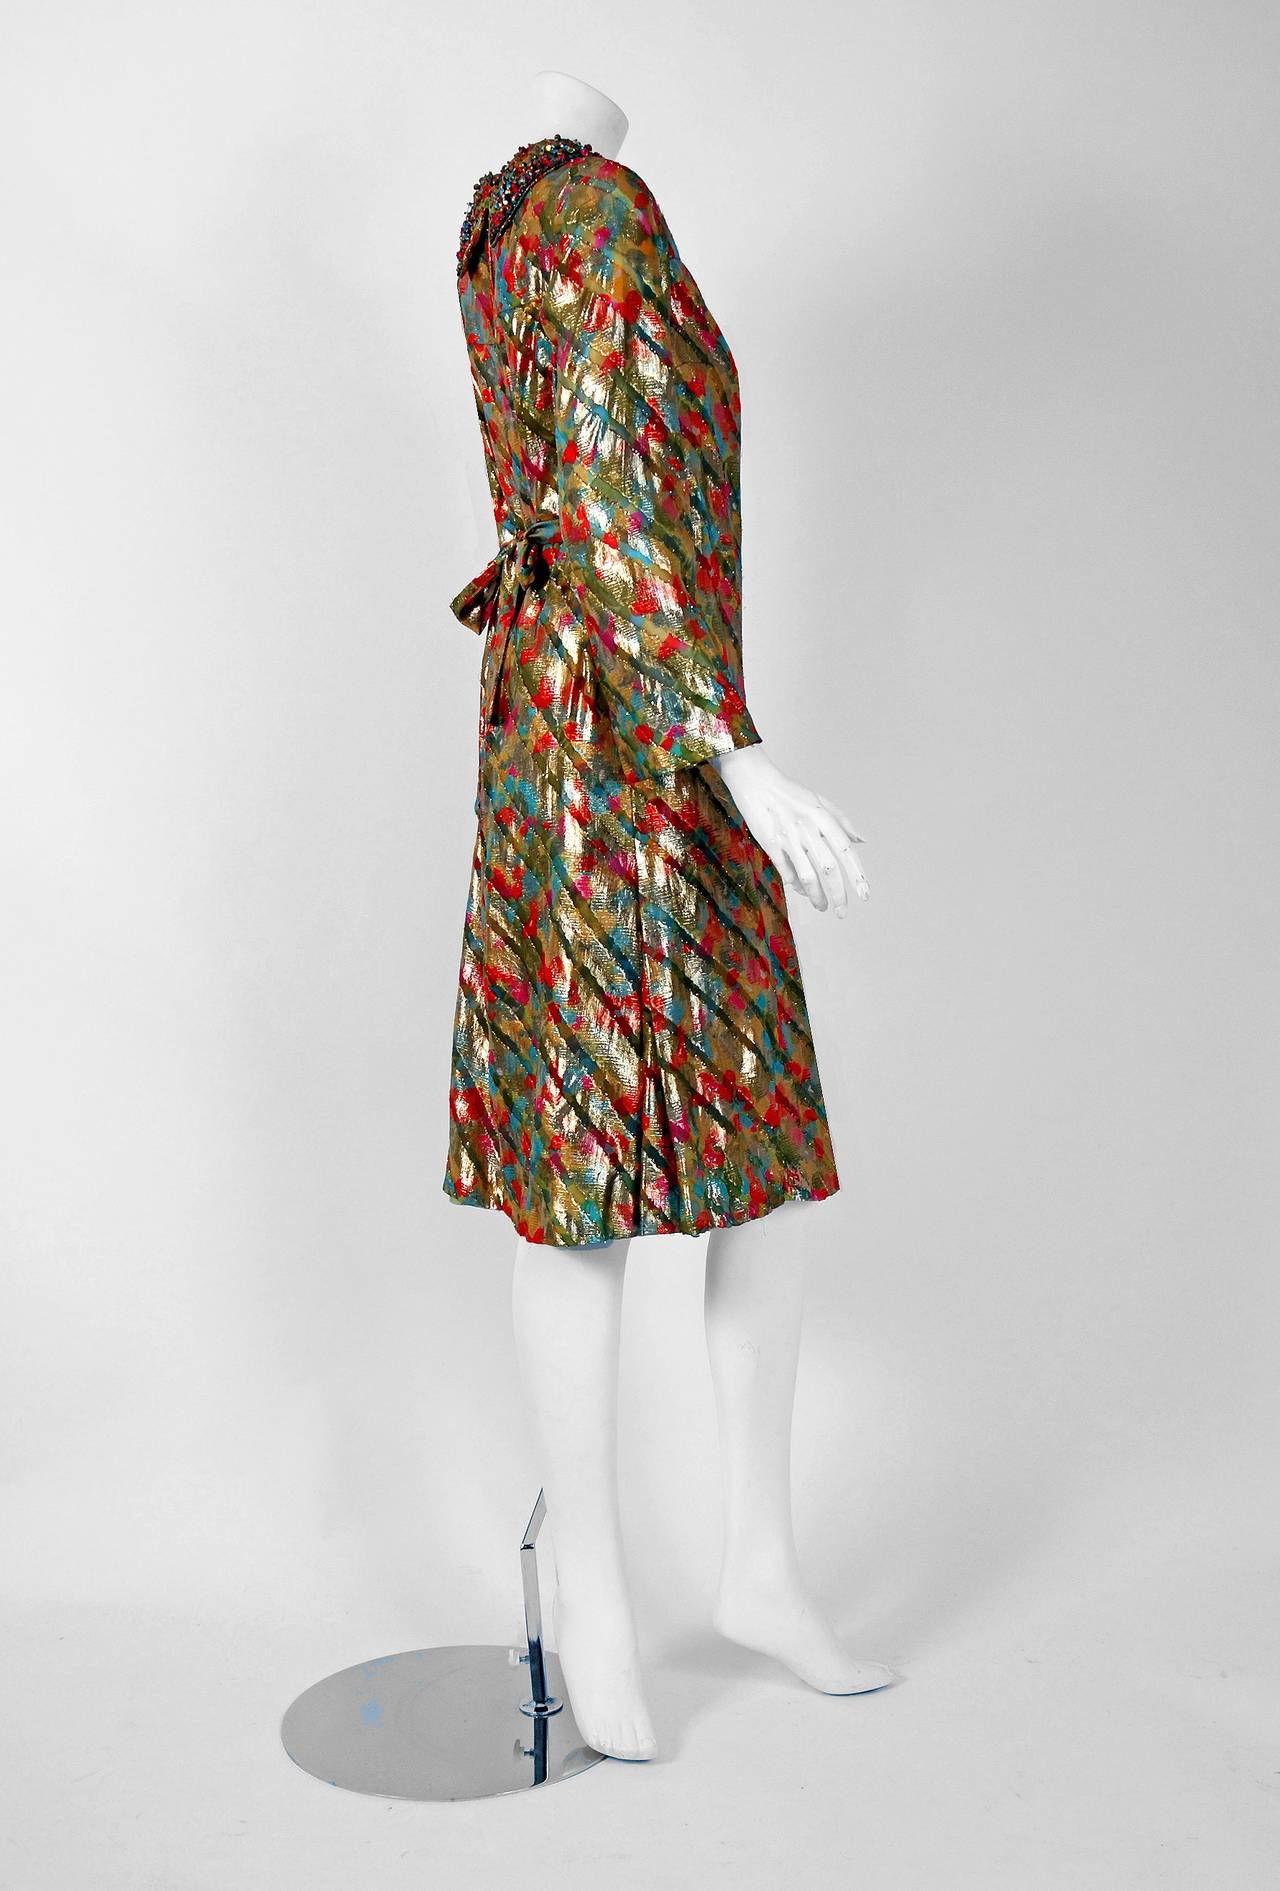 Truly a wonderful designer colorful lame silk cocktail dress by Branell. I think this is one of the best examples of 1960's mod glamour chic fashion I have seen in a long time. The design was obviously inspired by Courreges and Cardin who were the